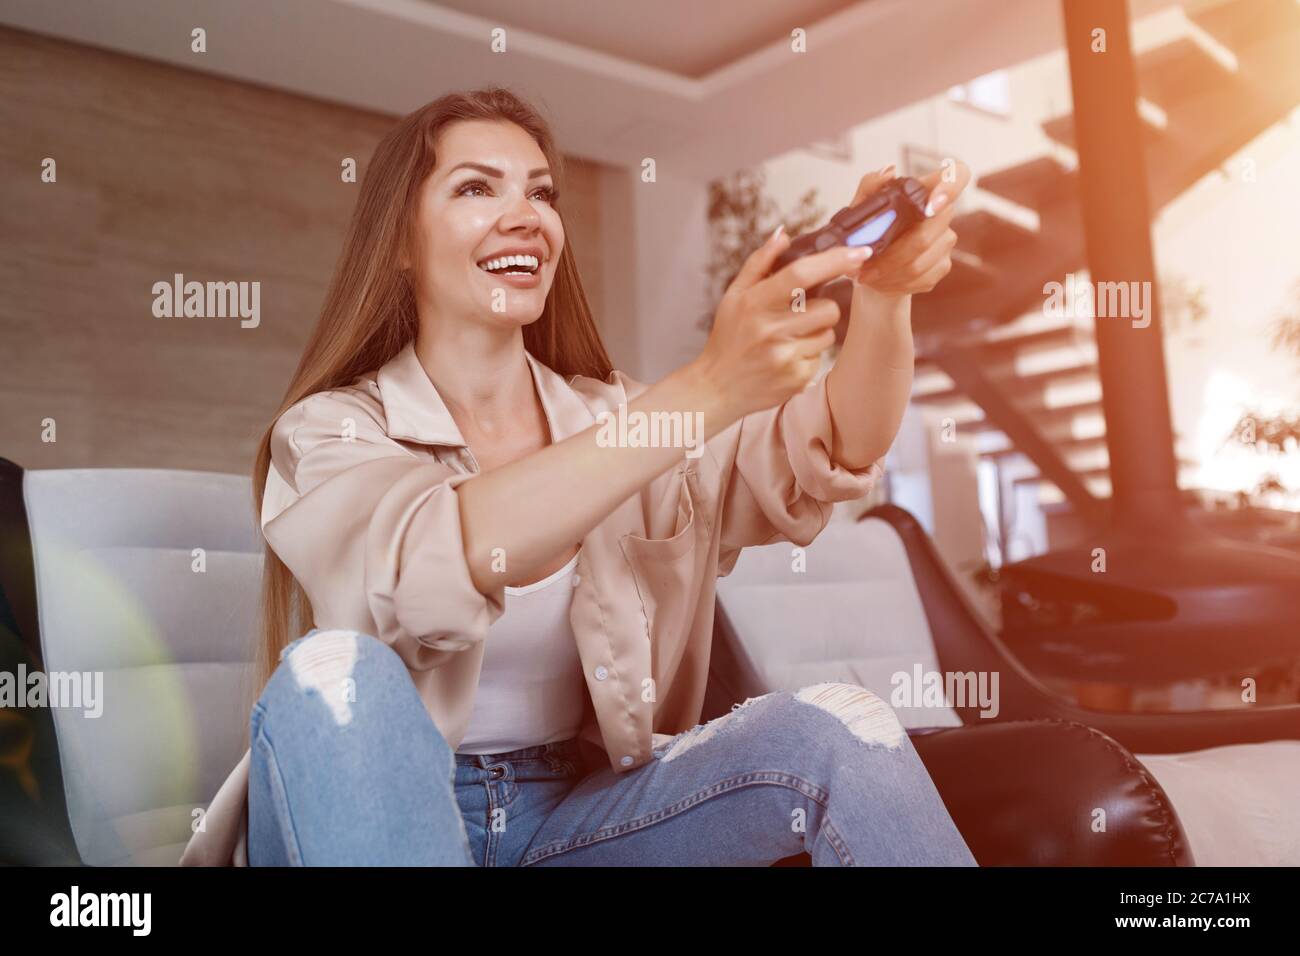 Smiling woman playing video games at home, Soft lights Stock Photo